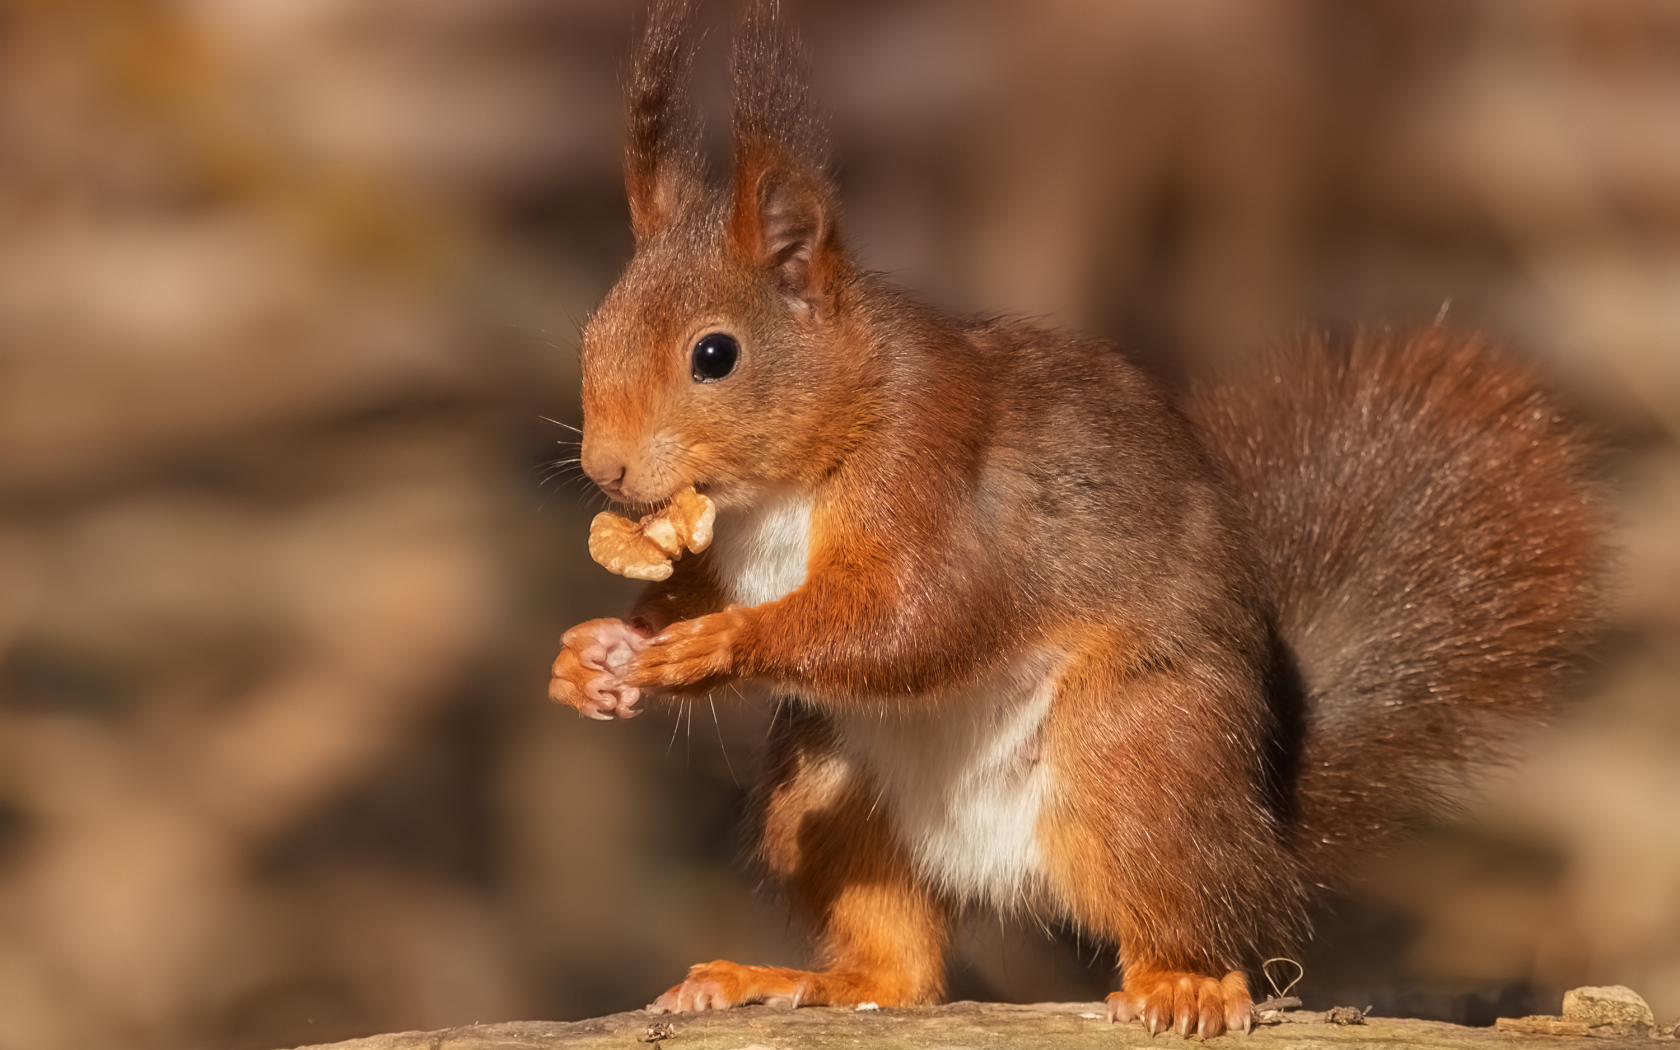 Funny red squirrel nibbles a walnut on a stump Desktop wallpapers 1680x1050